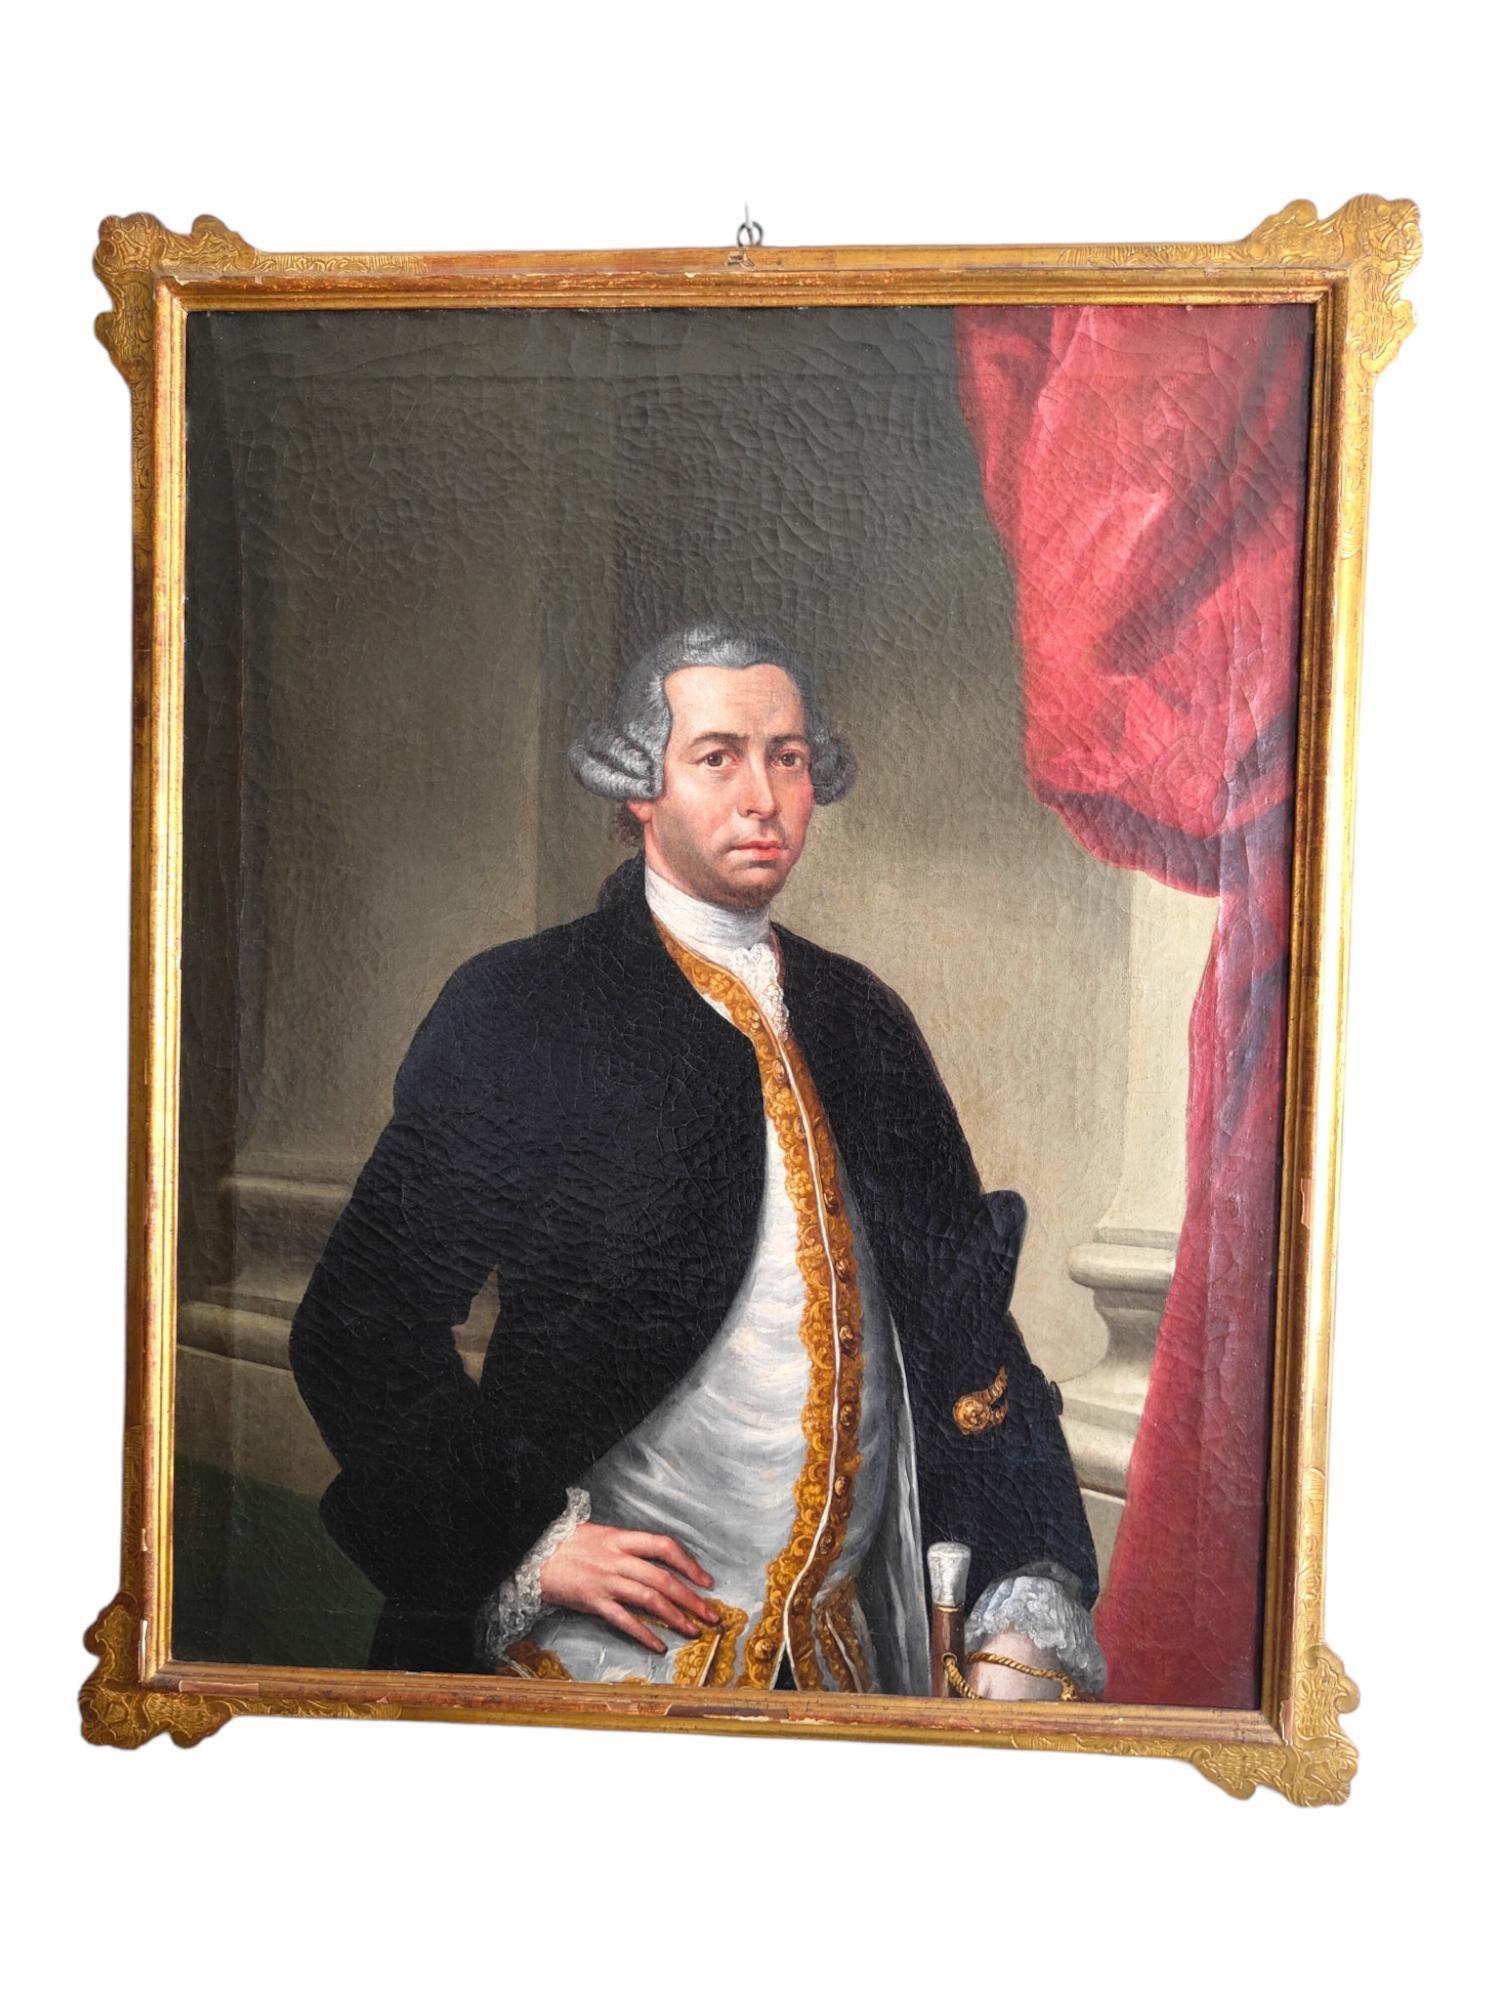 Portrait Of A Nobleman 18th century
PORTRAIT OF AN 18TH CENTURY NOBLE ELEGANT AND LARGE PAINTING WITH THE PORTRAIT OF AN 18TH CENTURY EUROPEAN NOBLE EXCELLENT CONDITION ORIGINAL FRAME MEASUREMENTS: 125 X 105 CM WITH FRAME